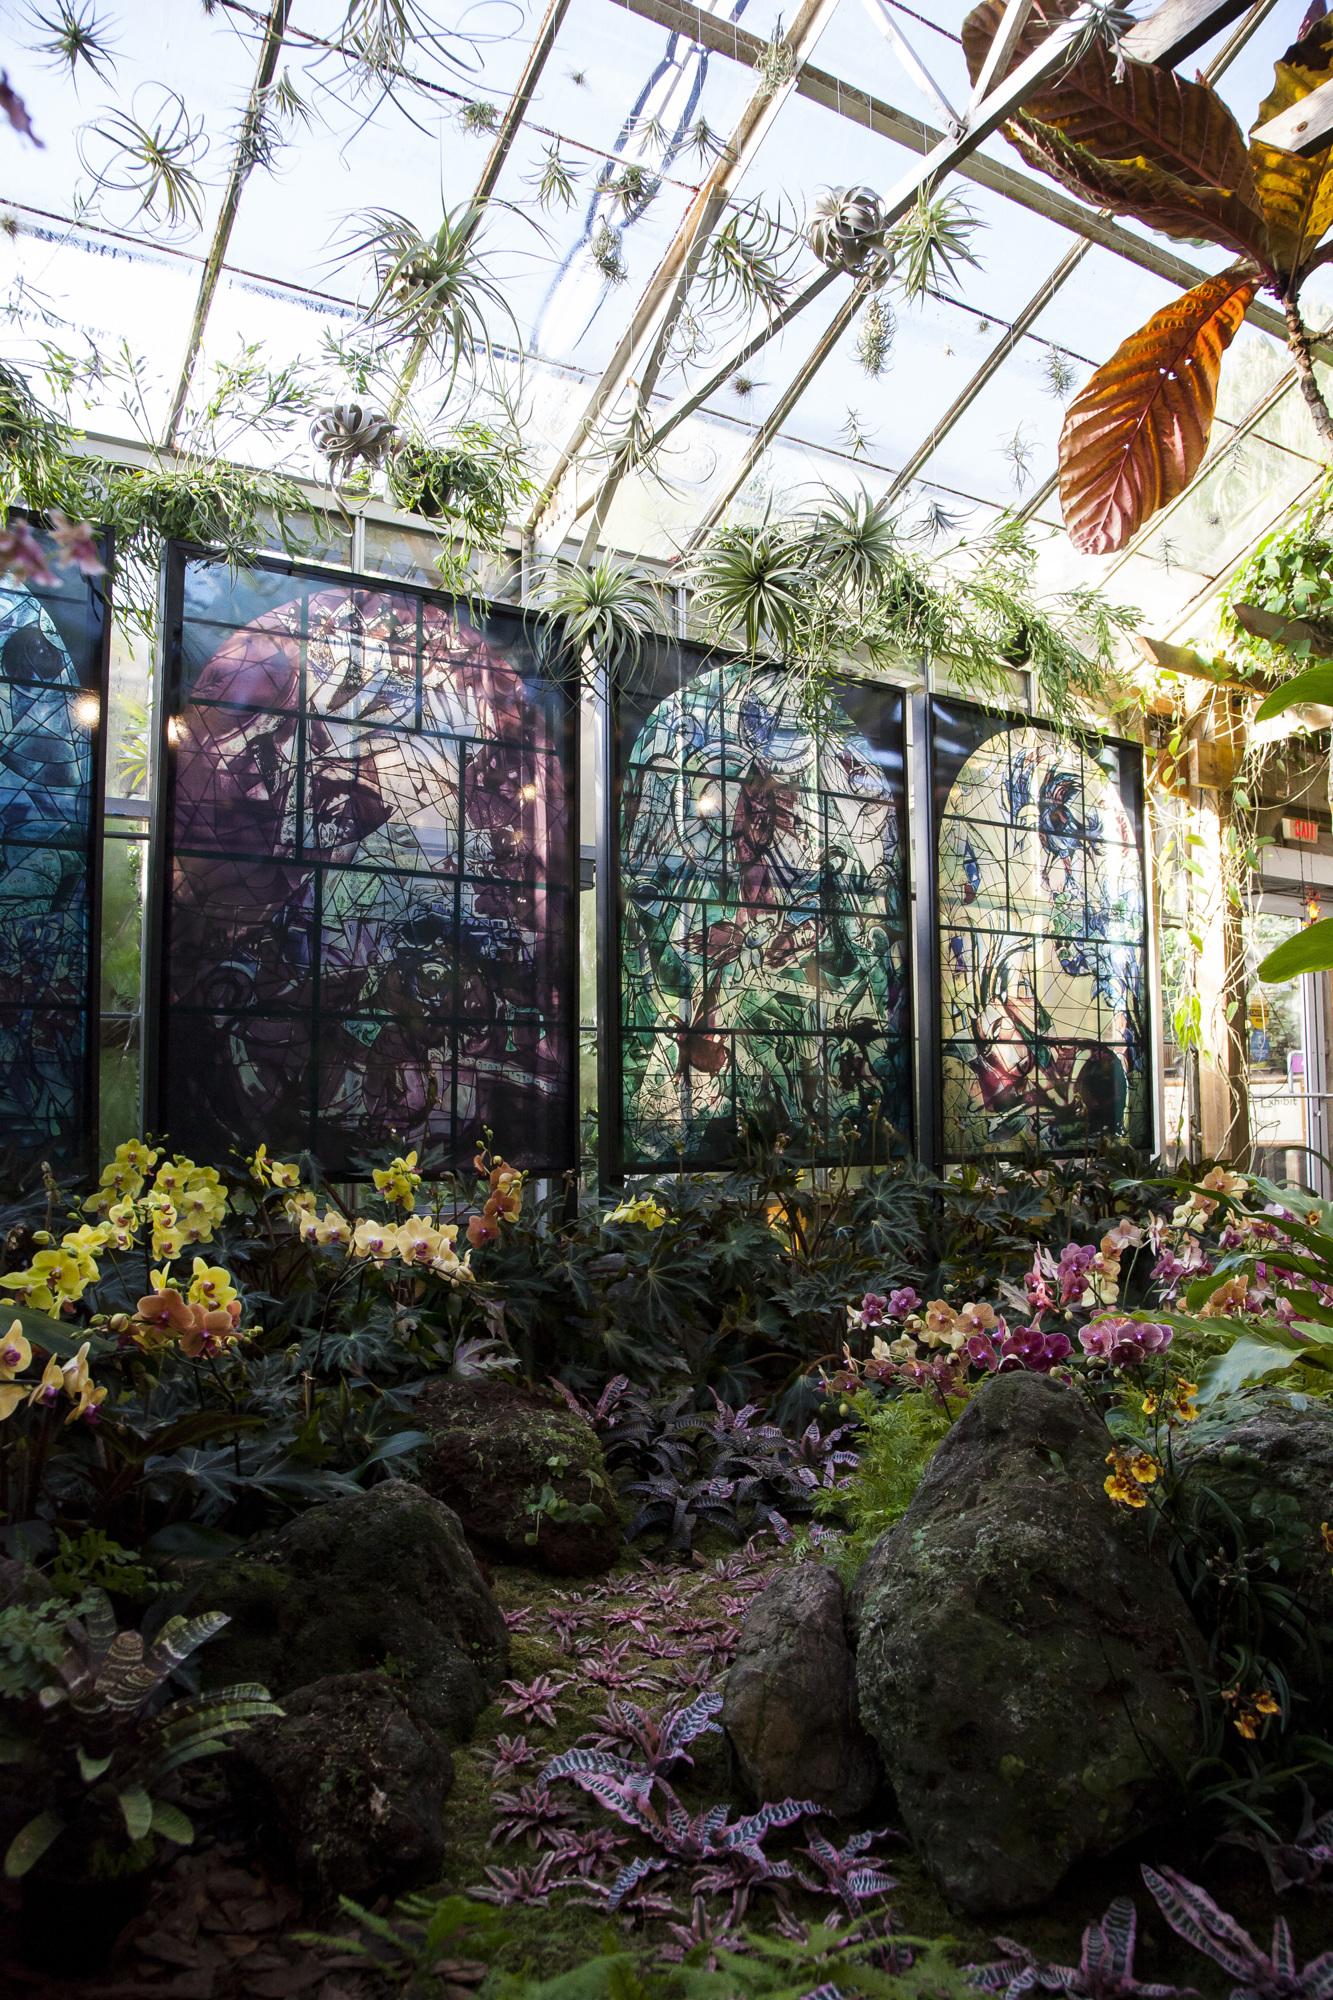 The exhibition starts in a glass conservatory, featuring replicas of Chagall’s stained glass and a cathedral of living plants. Courtesy of Artists Rights Society.